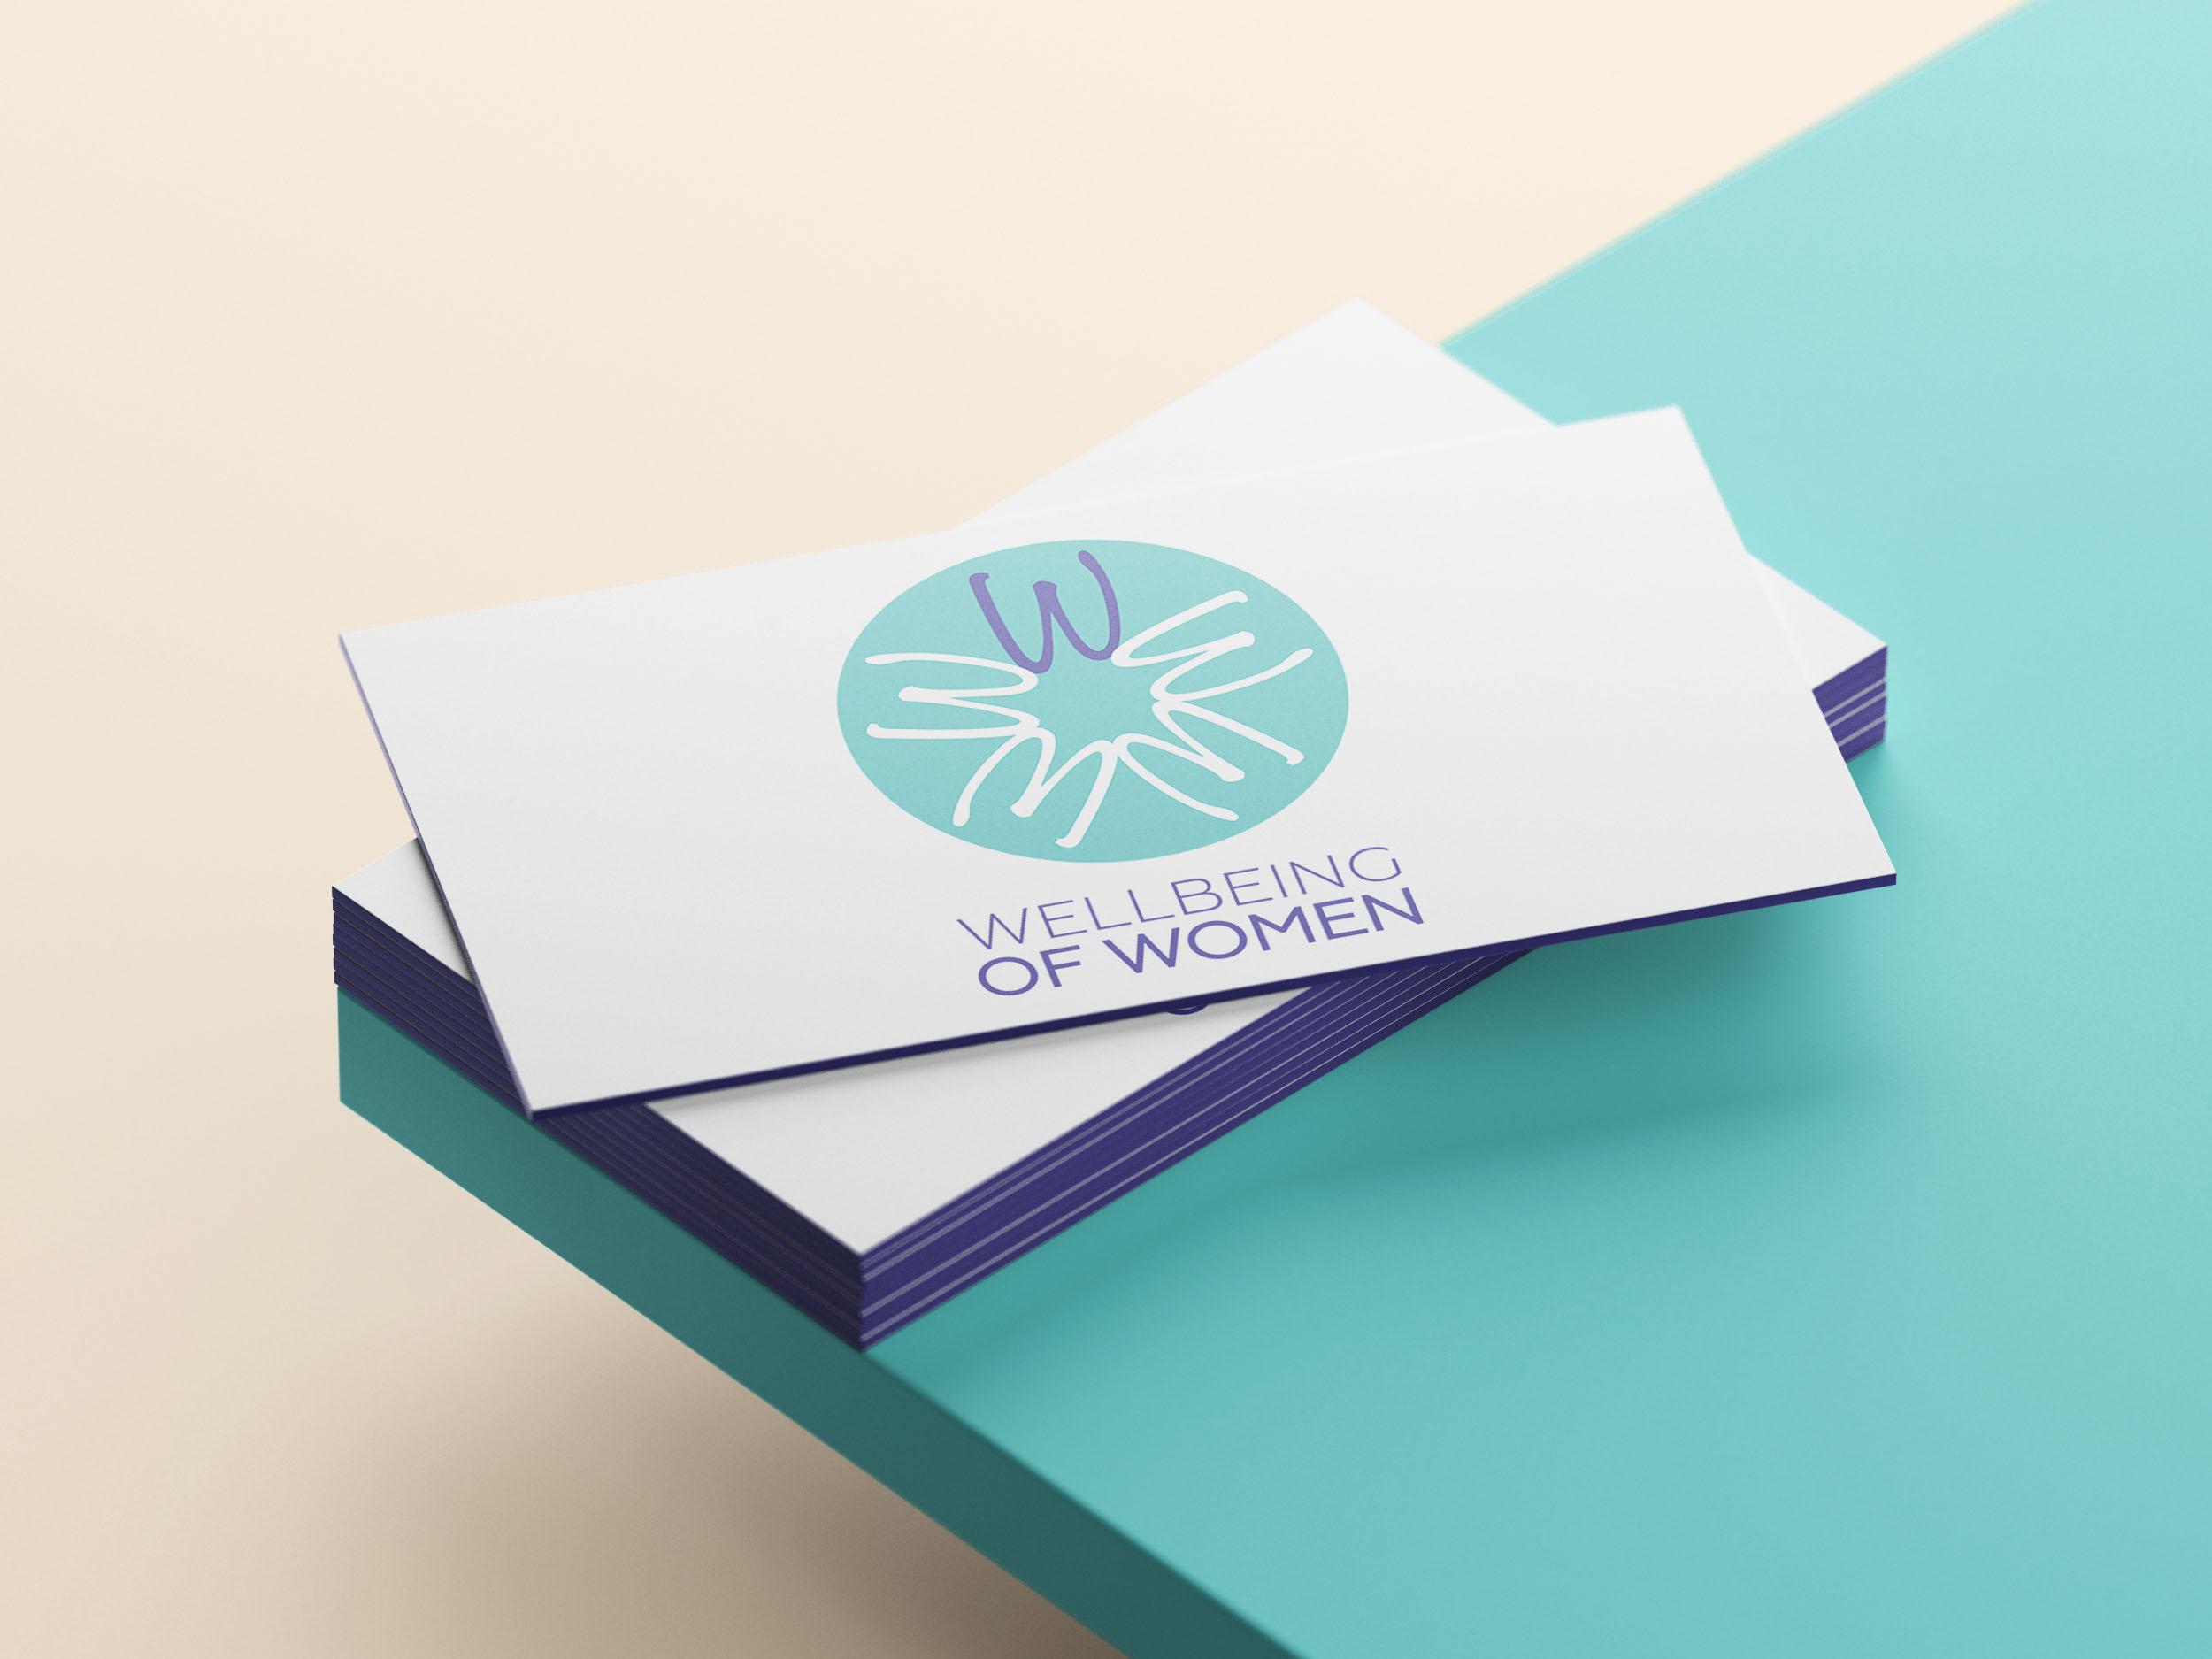 Wellbeing-of-women-business-cards-logo-featured-image